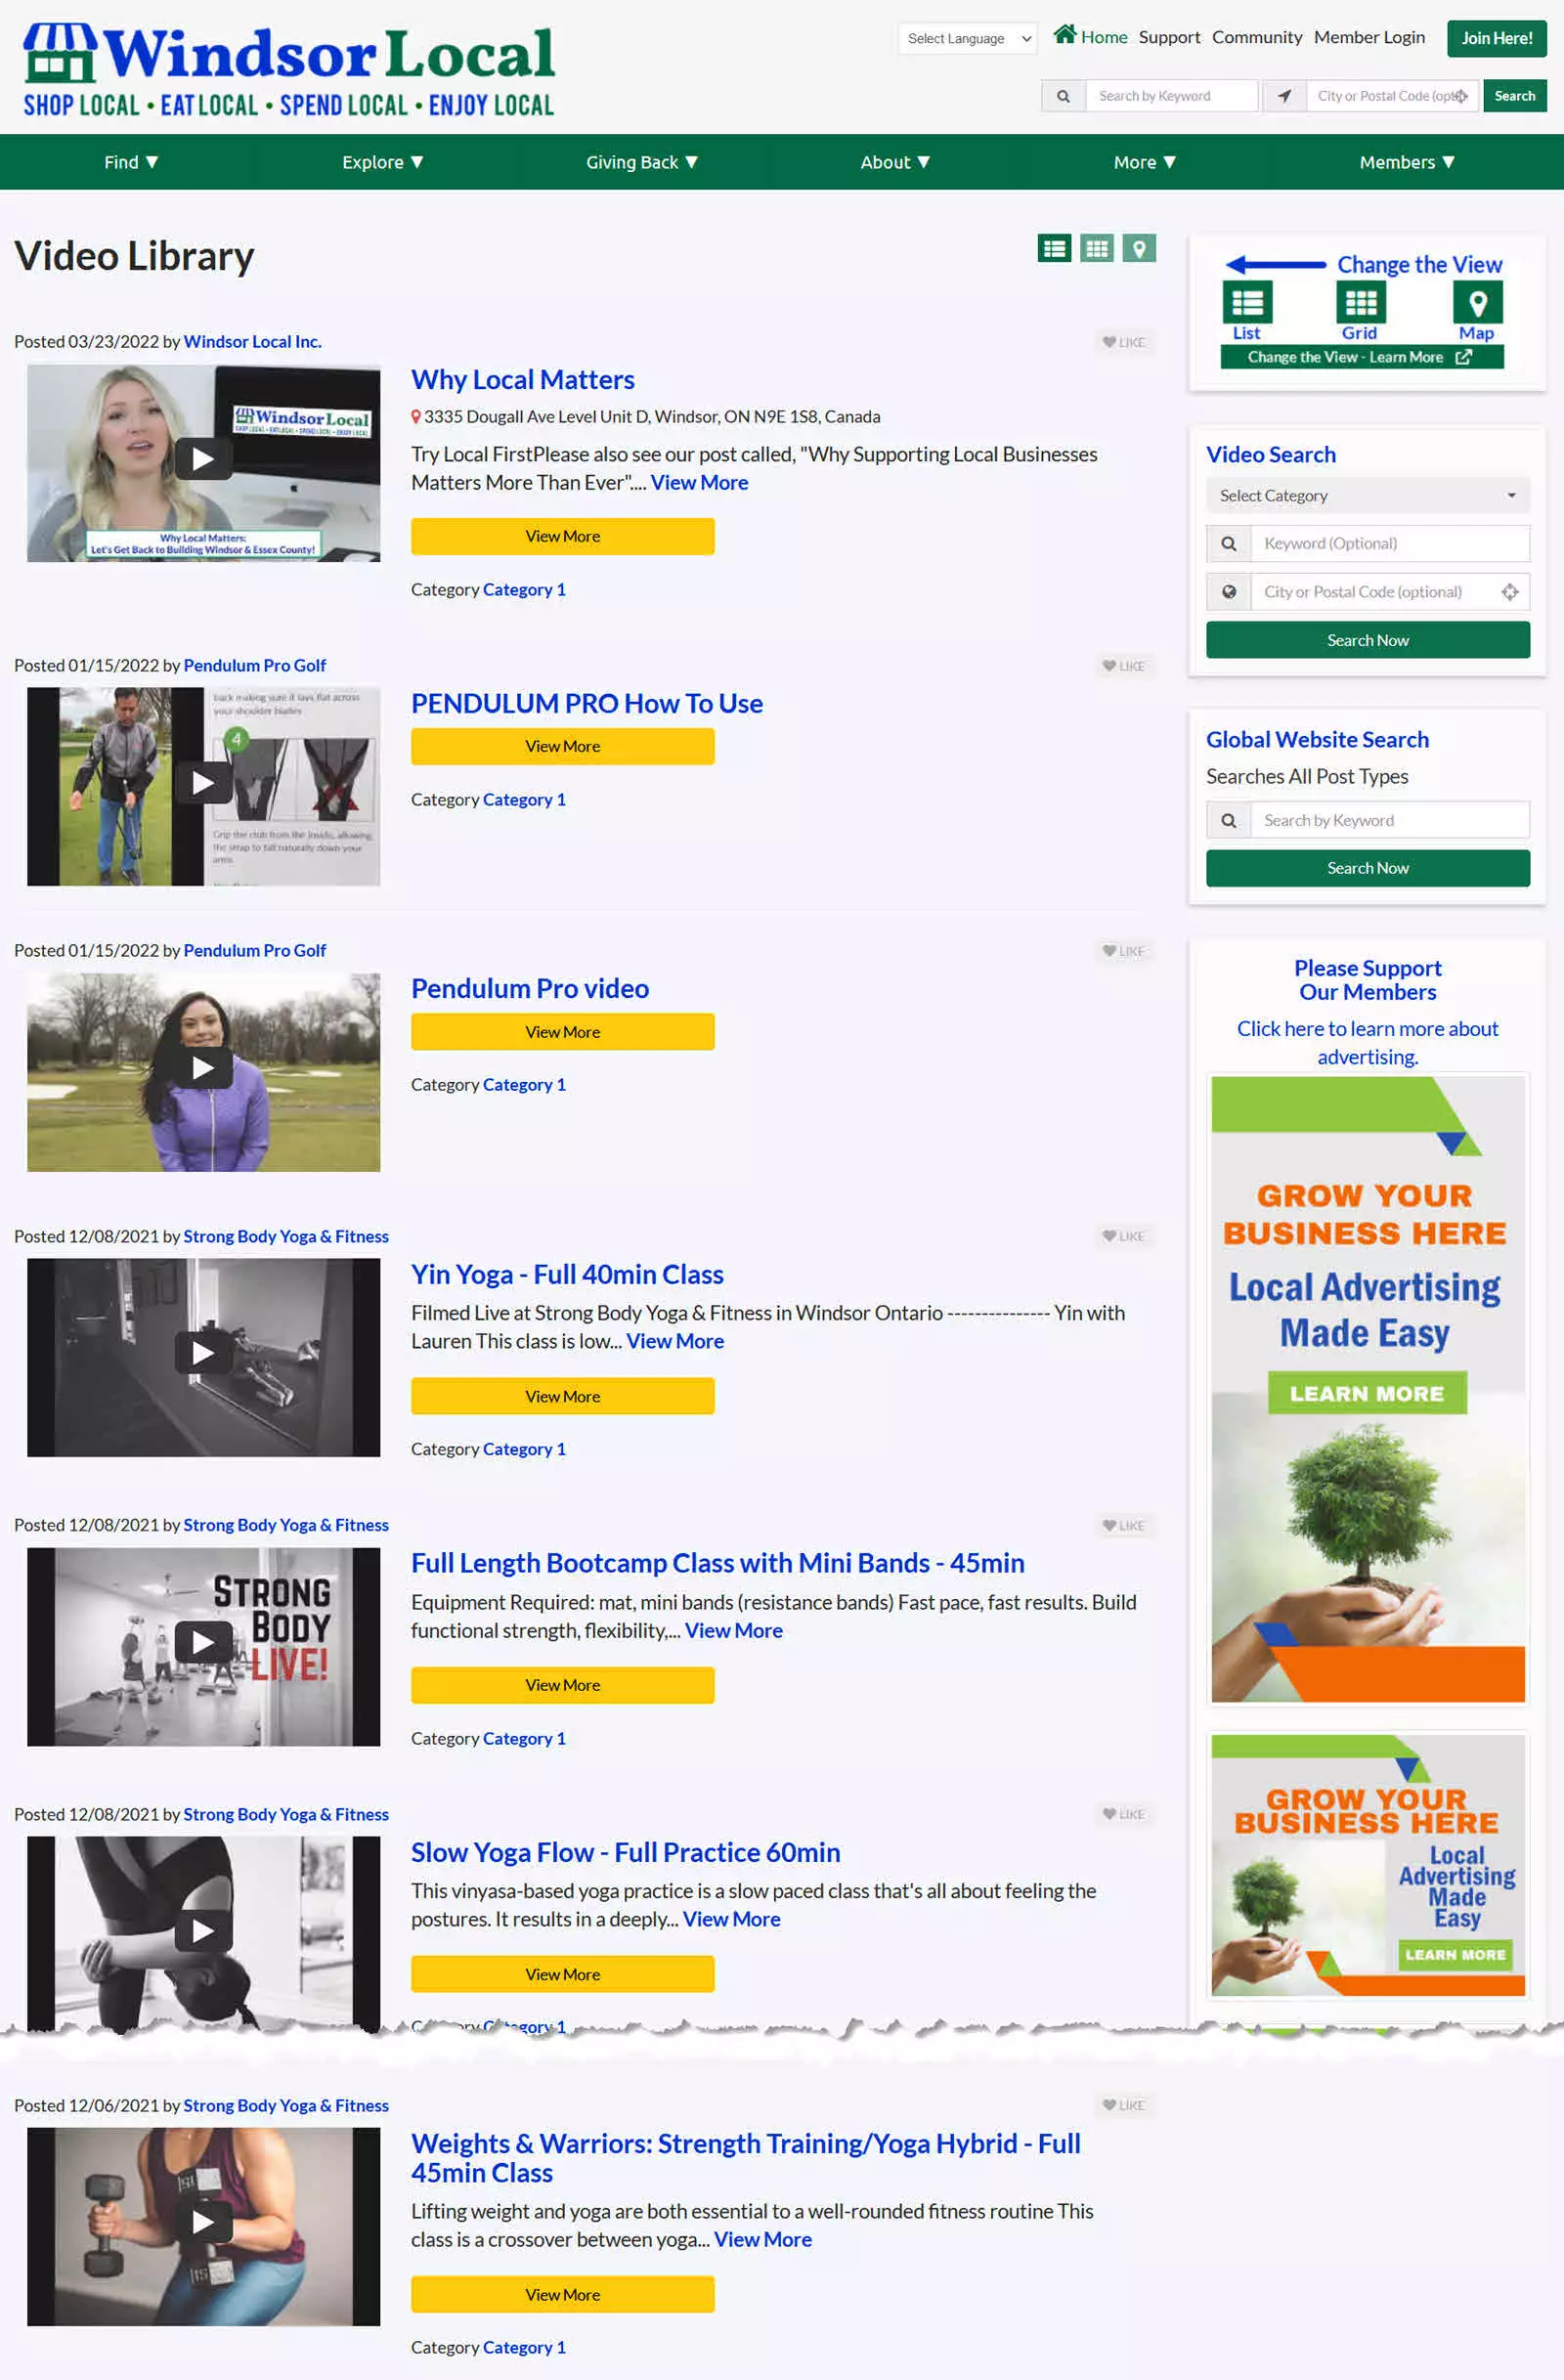 Windsor Local Videos Search Summary Results view